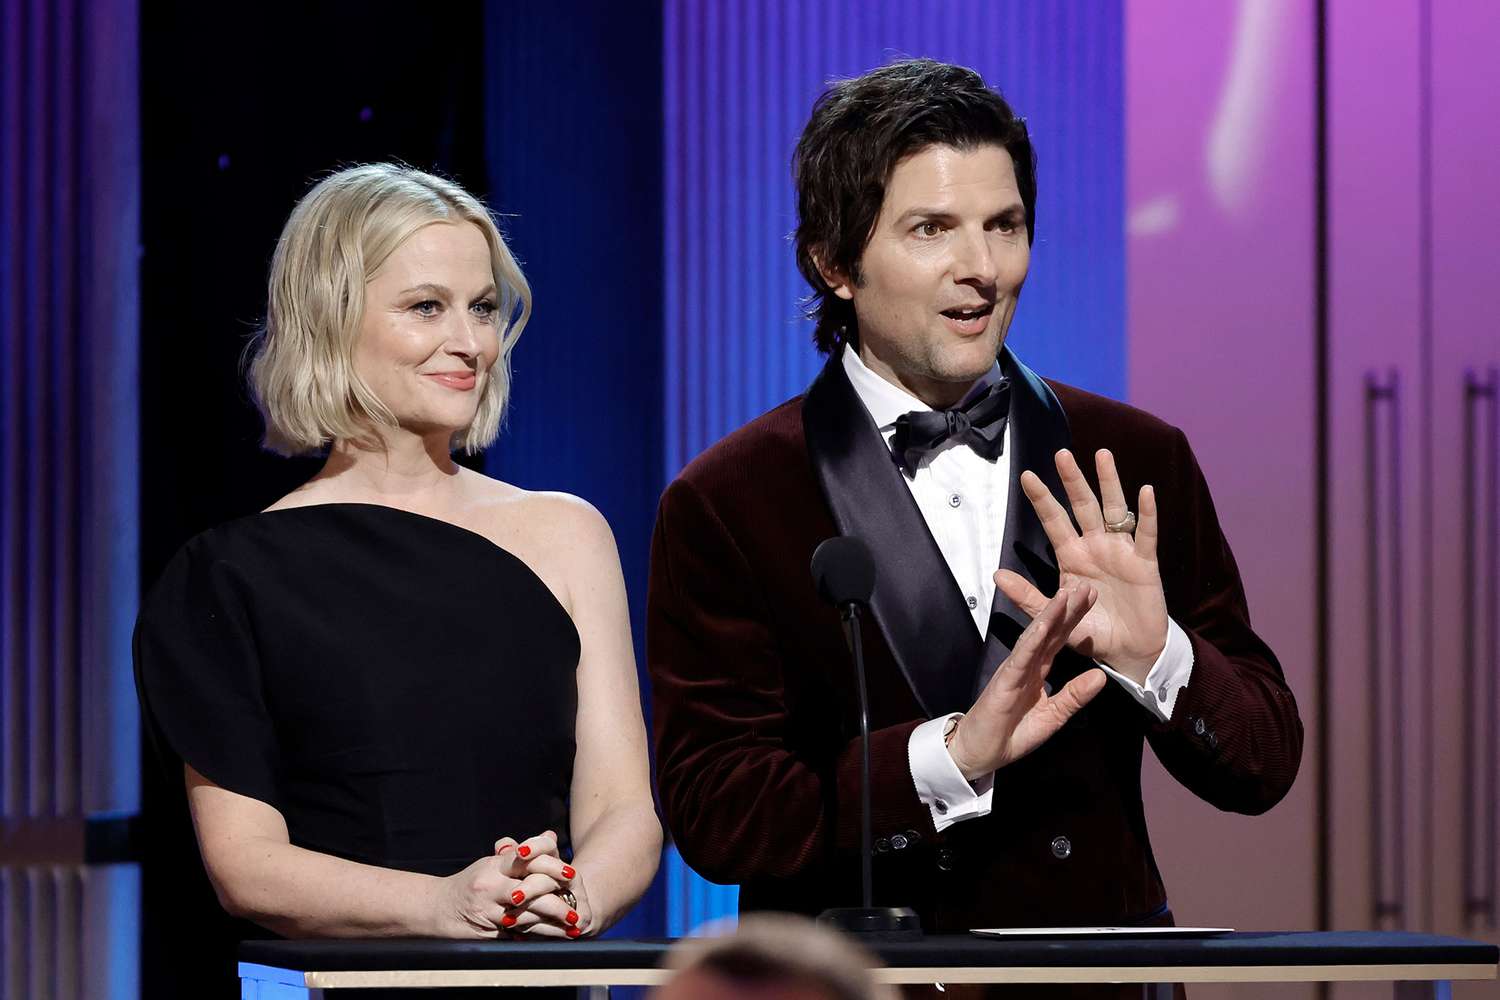 'Parks and Recreation' stars Amy Poehler and Adam Scott reunite at the 2023 SAG Awards